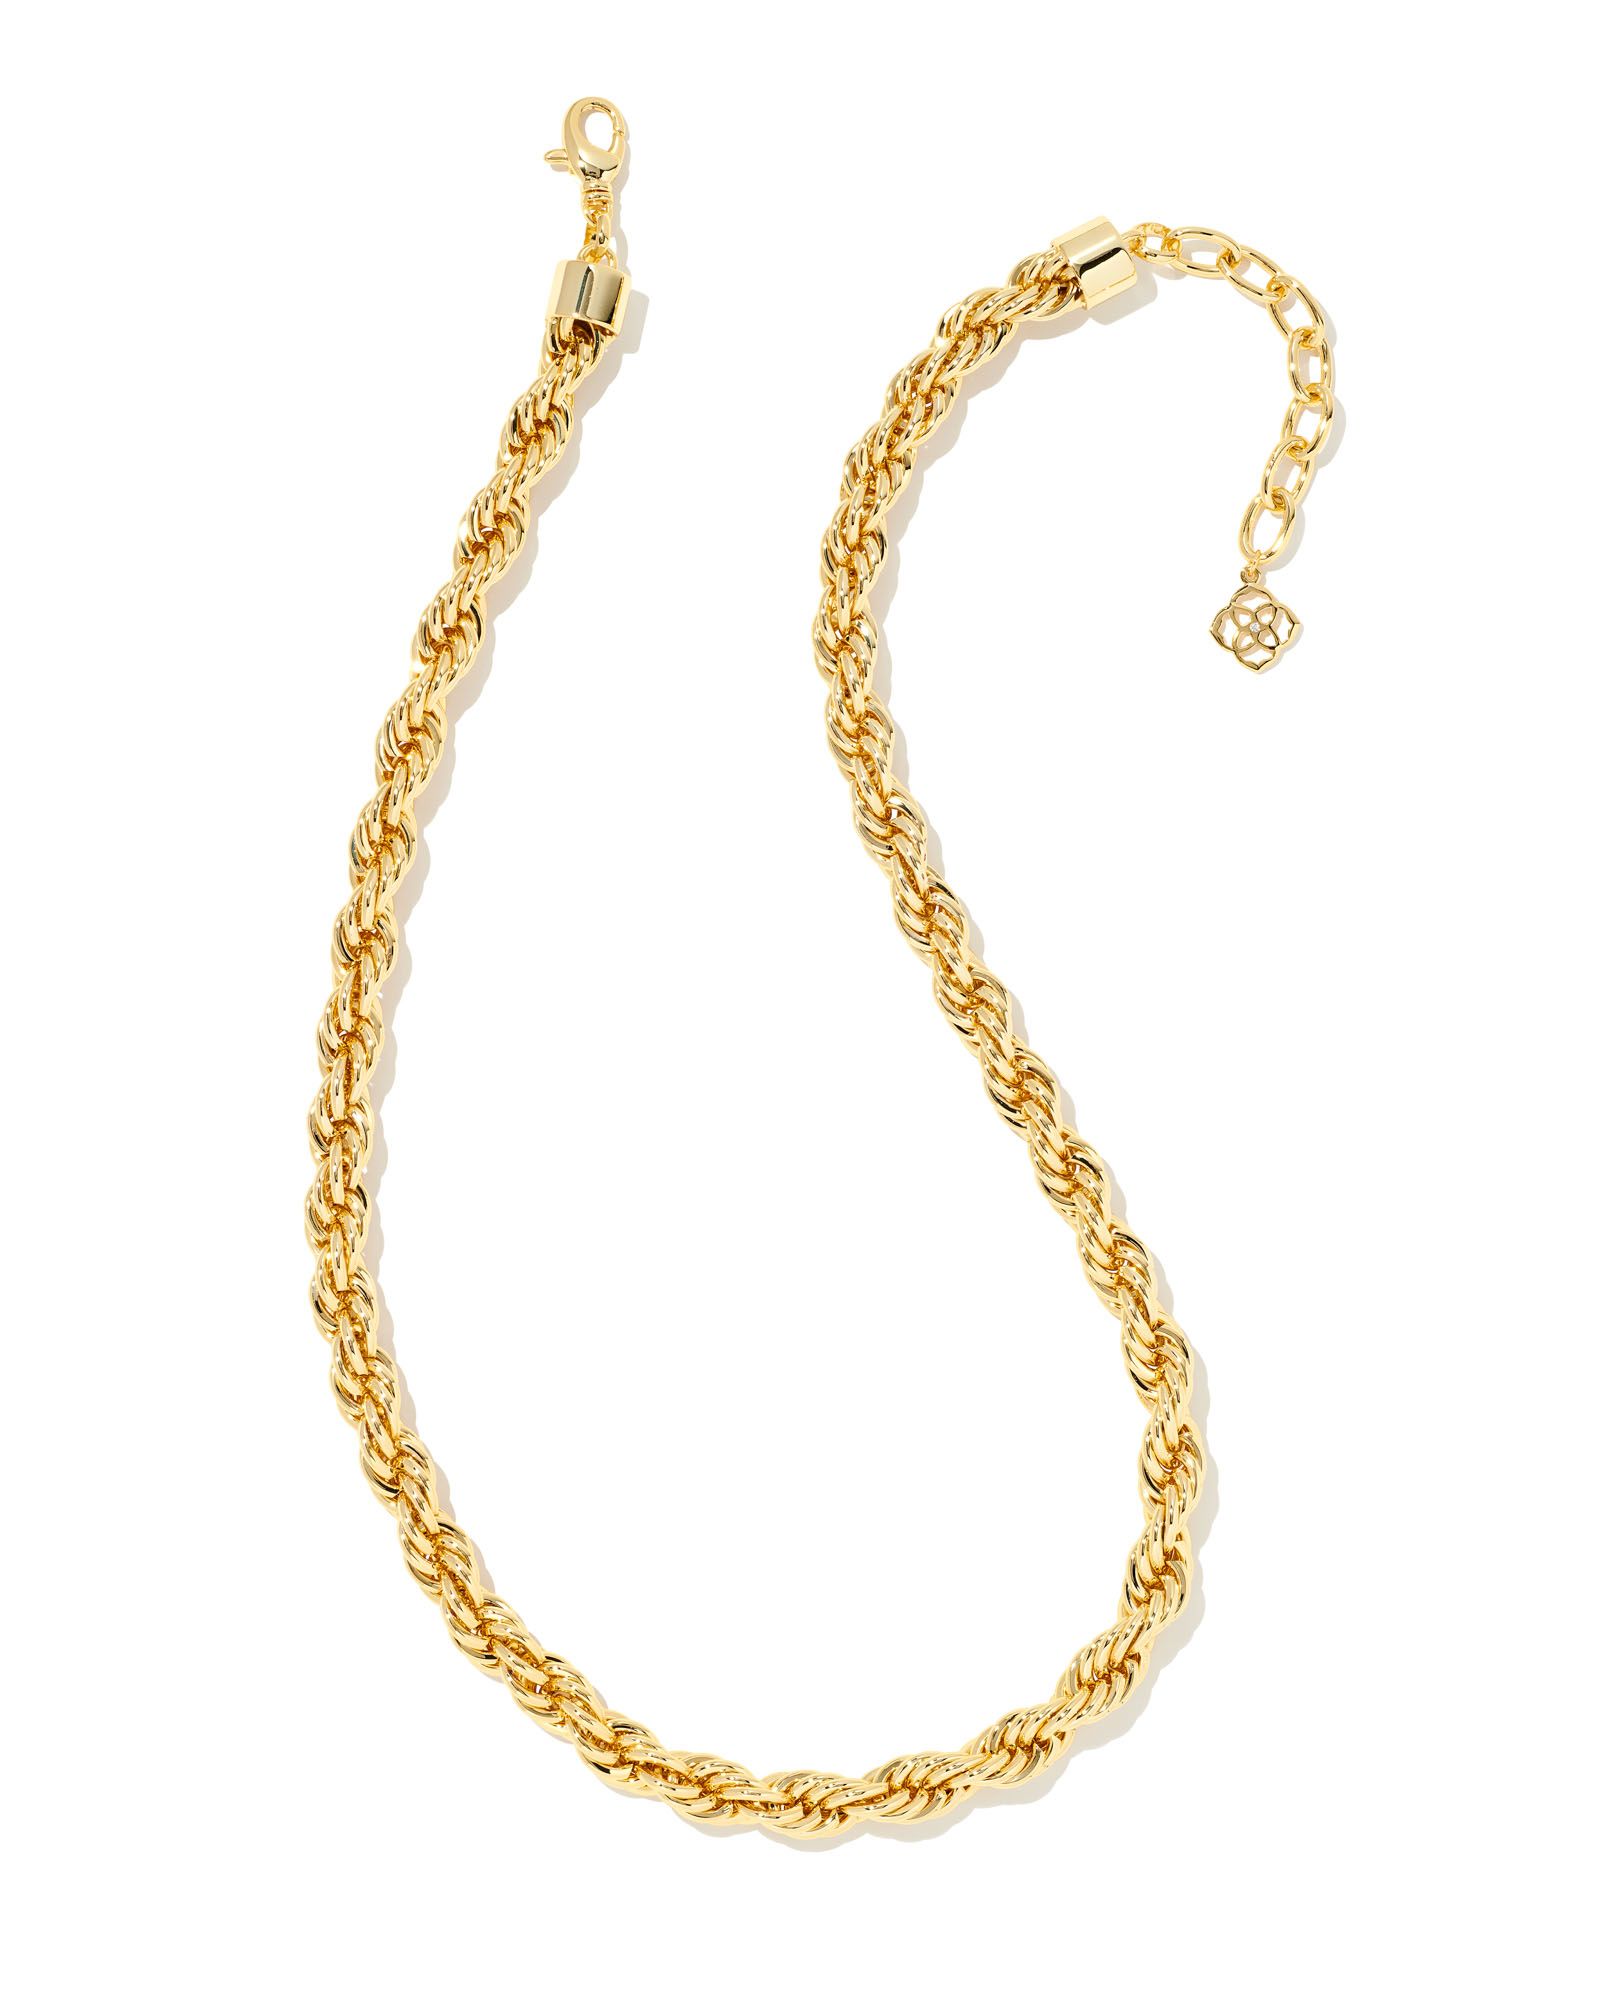 Cailey Chain Necklace in Gold | Kendra Scott | Kendra Scott